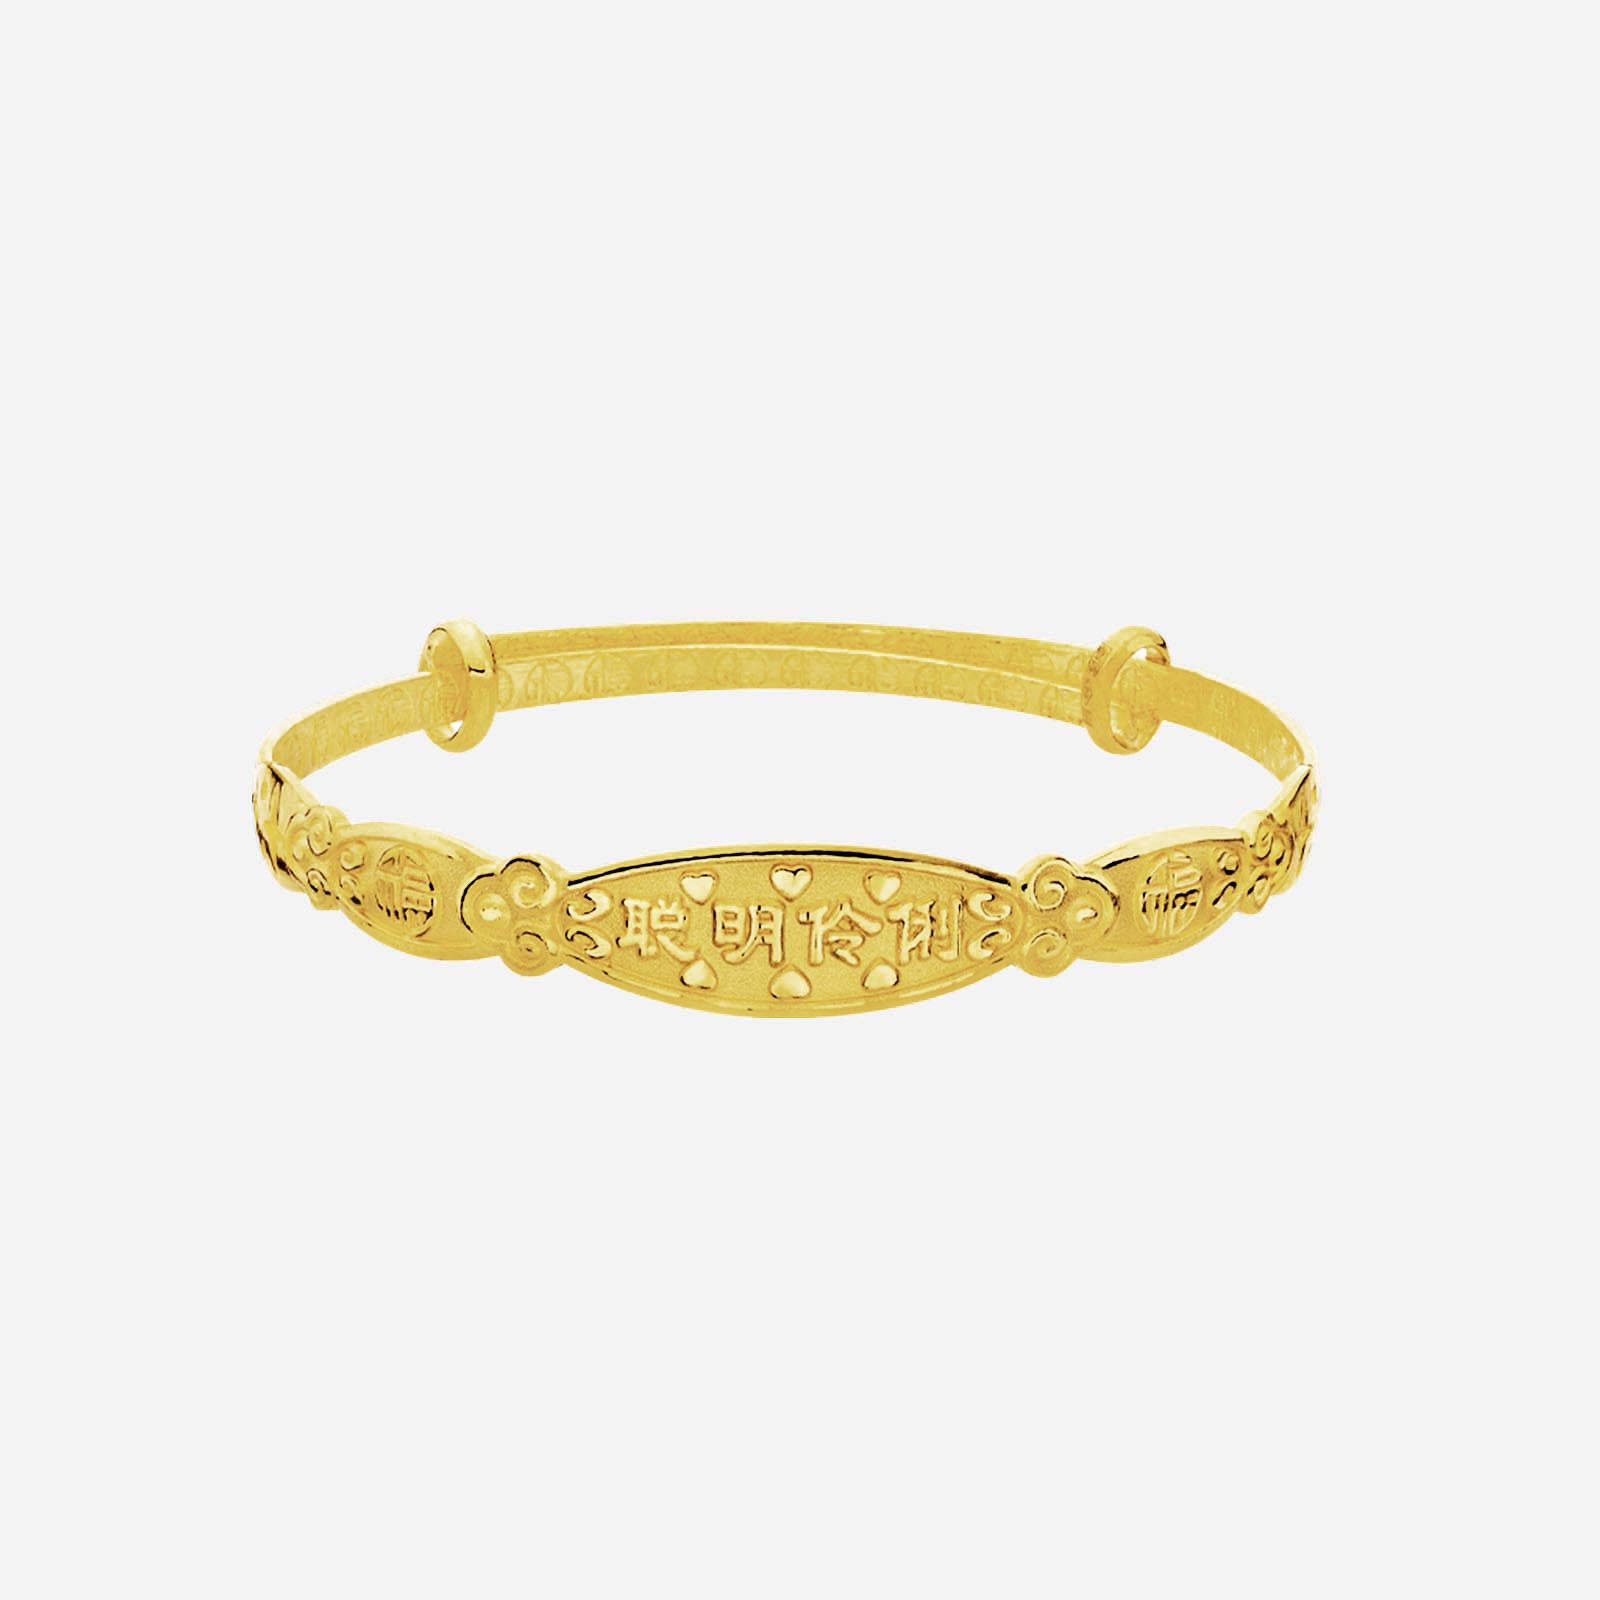 Where to Buy Baby Gold Bracelet That is Safe and Investment-Worthy: Our Top 5 Picks